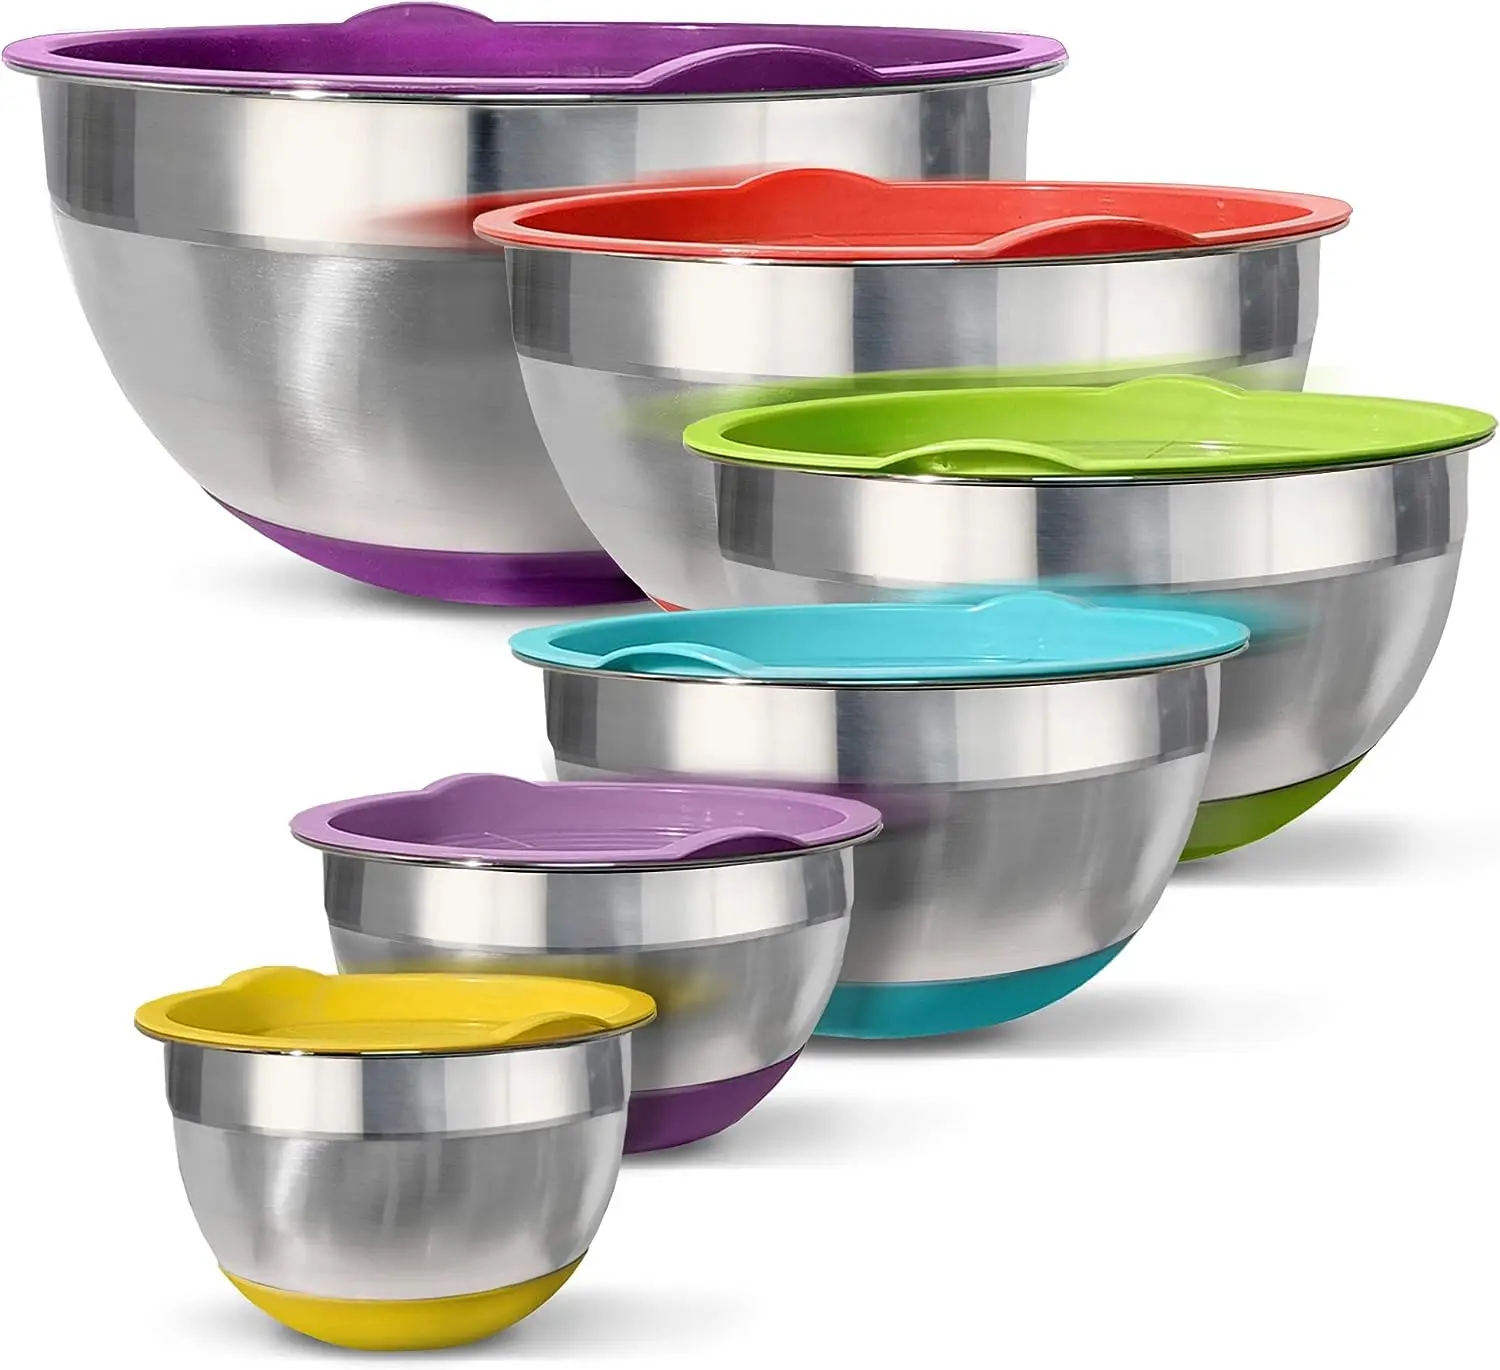 Steel Mixing Bowls with Lids – Non-Slip Bottoms, Nesting for